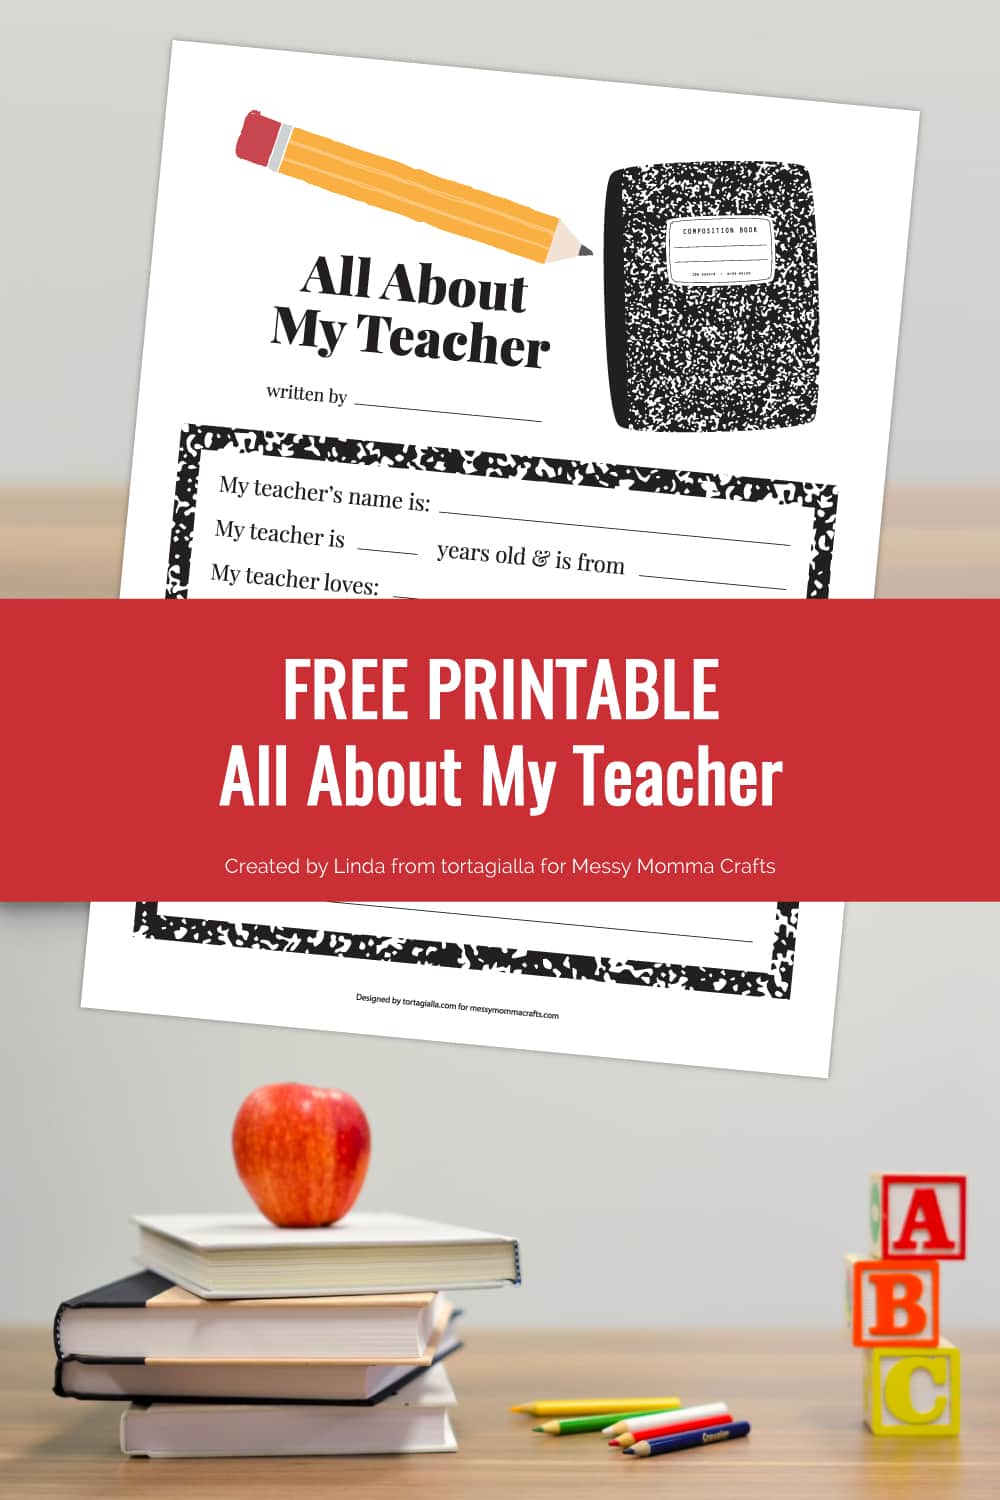 Preview of all about my teacher printable page on top of school themed background with bottom showing deskw ith stack of books with apple on top colored pencils and abc blocks.